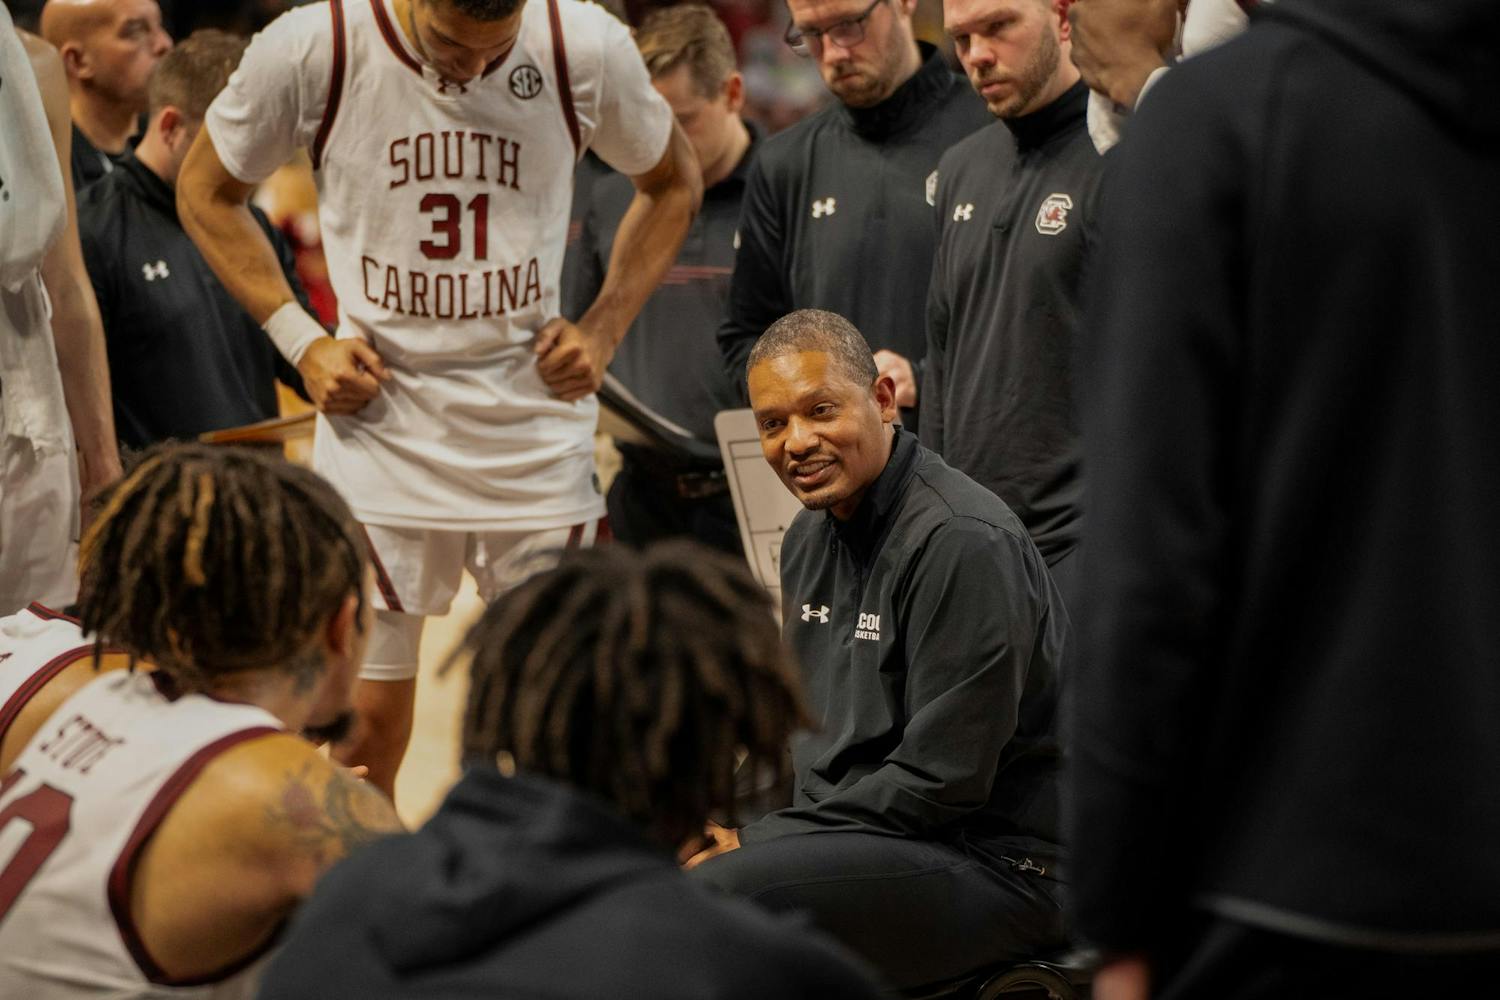 Men's basketball head coach Lamont Paris talks to his players on Nov. 13 during their 74-64 victory over Virginia Military Institute. During his seventh season as a collegiate head coach, Paris has led the Gamecocks to a 13-1 start.